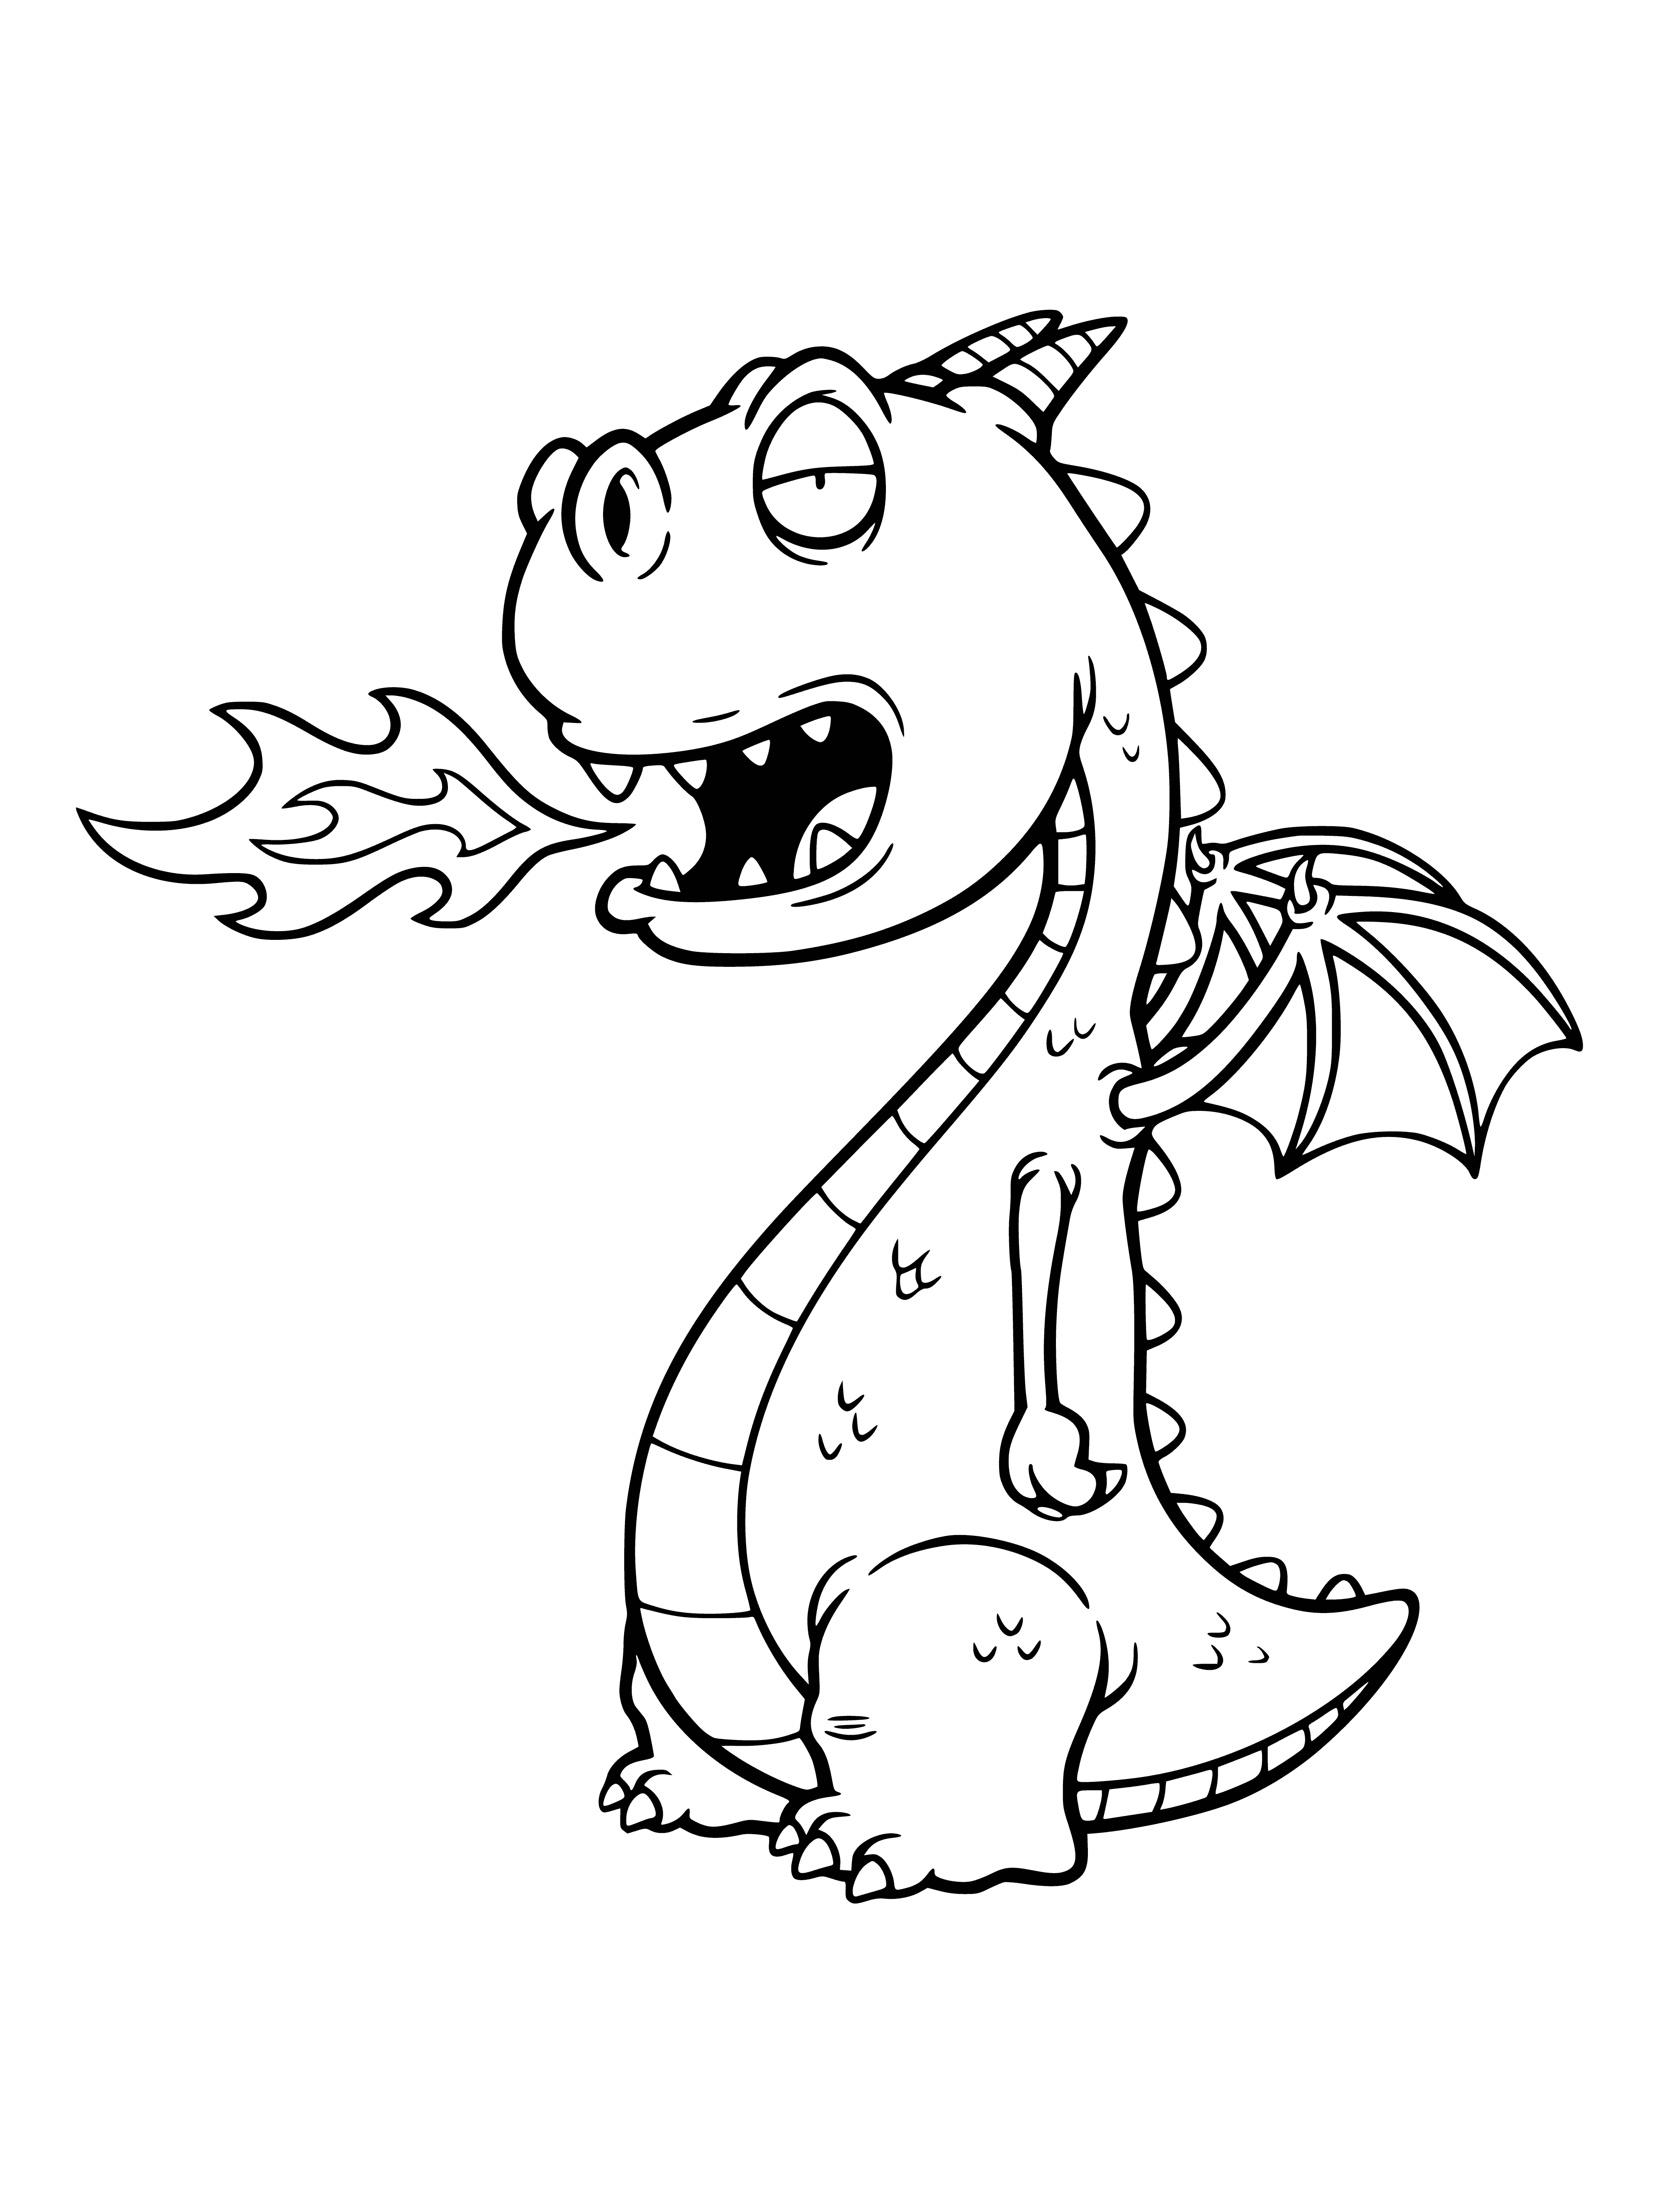 coloring page: Angry dragon with fiery scales, spikes and smoke spewing from its mouth and nose.